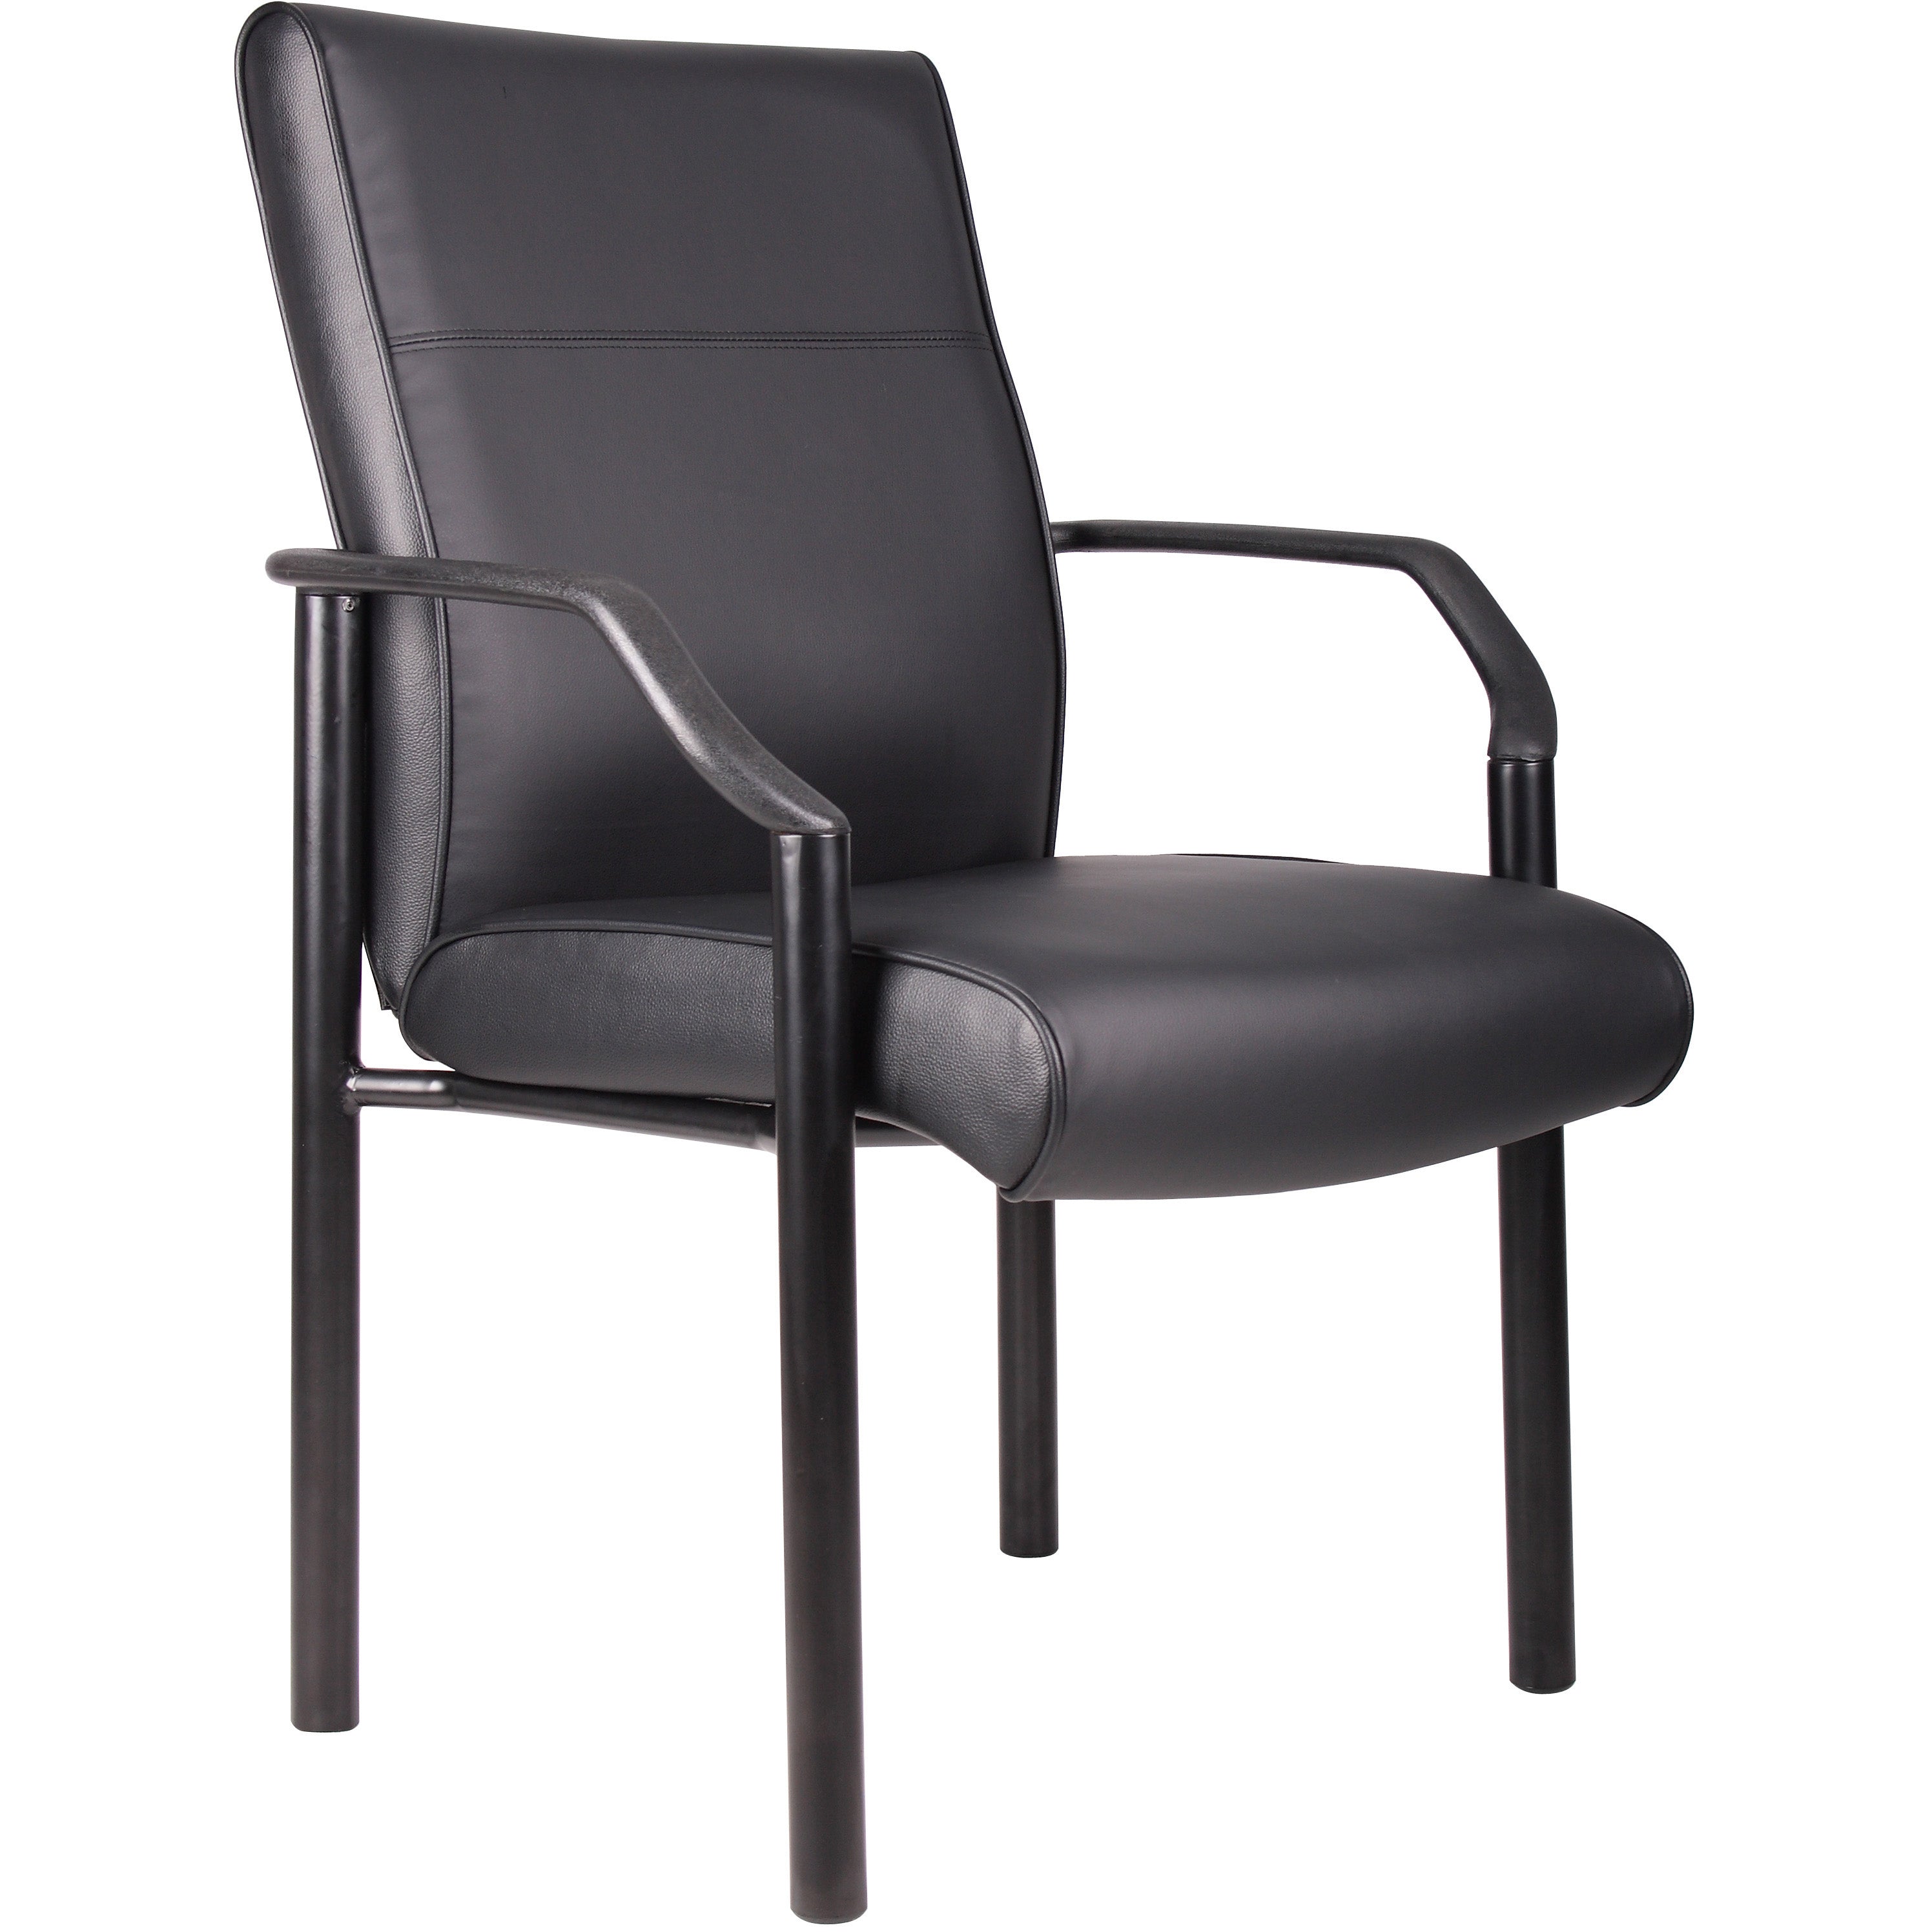 Mid Back Guest Chair In LeatherPlus, B689